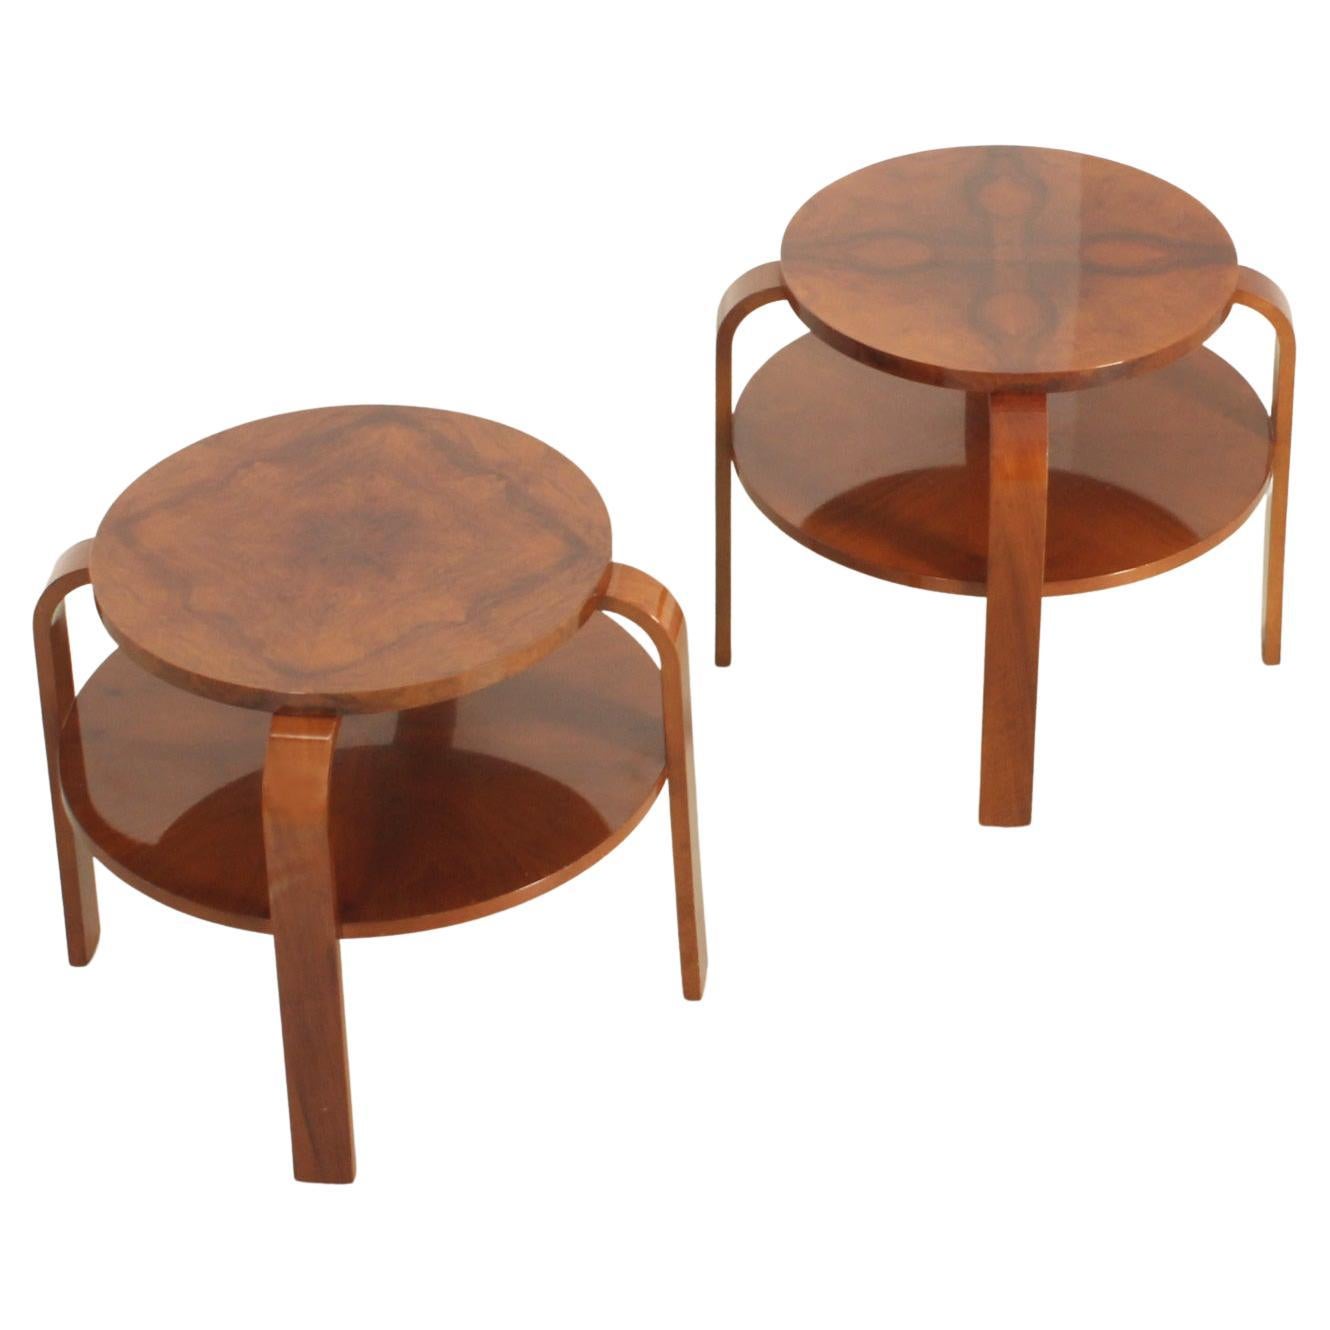 Pair of Art Deco Side Tables from 1930s, Spain